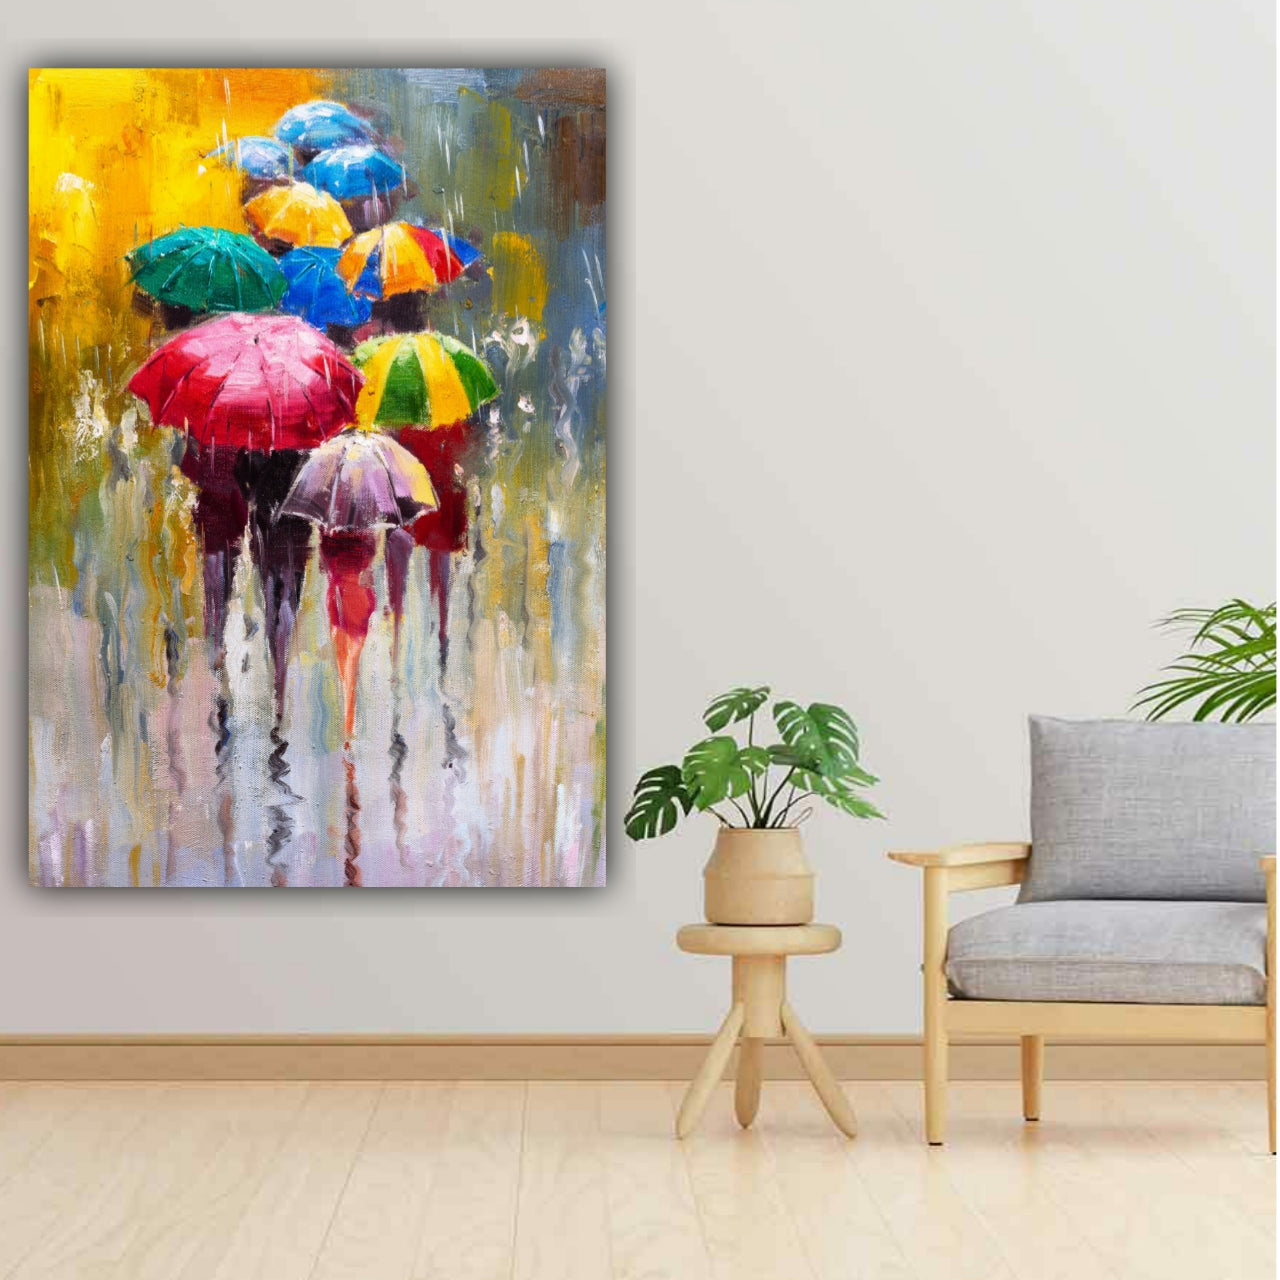 Handmade Canvas Painting Abstract Wall Art Painting Frame for Living Room